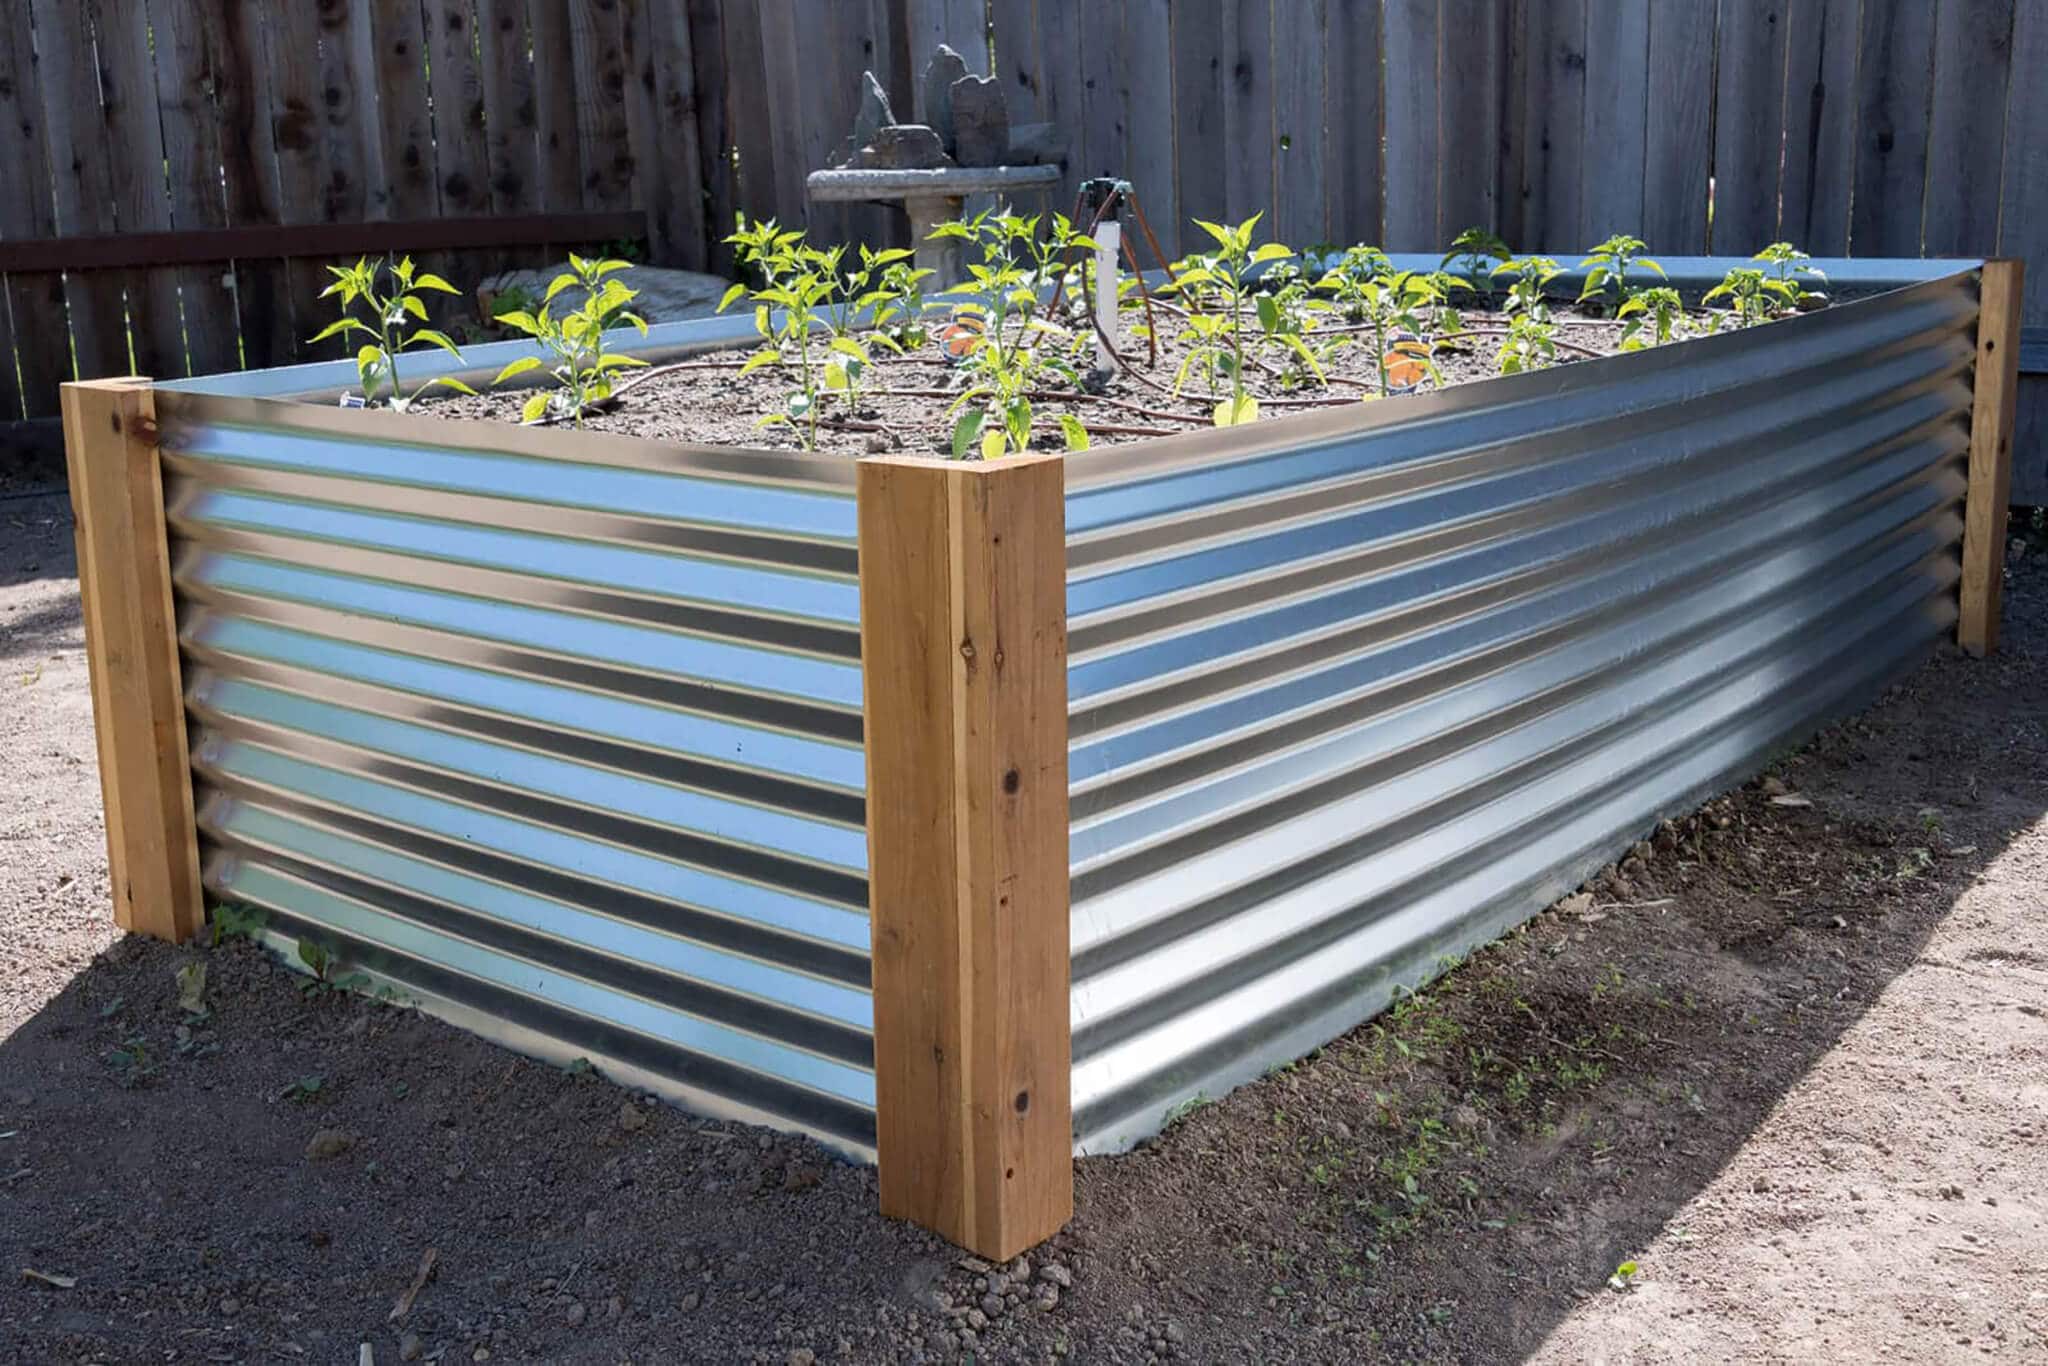 How To Build A Metal Raised Garden Bed, How To Build Tall Raised Garden Beds